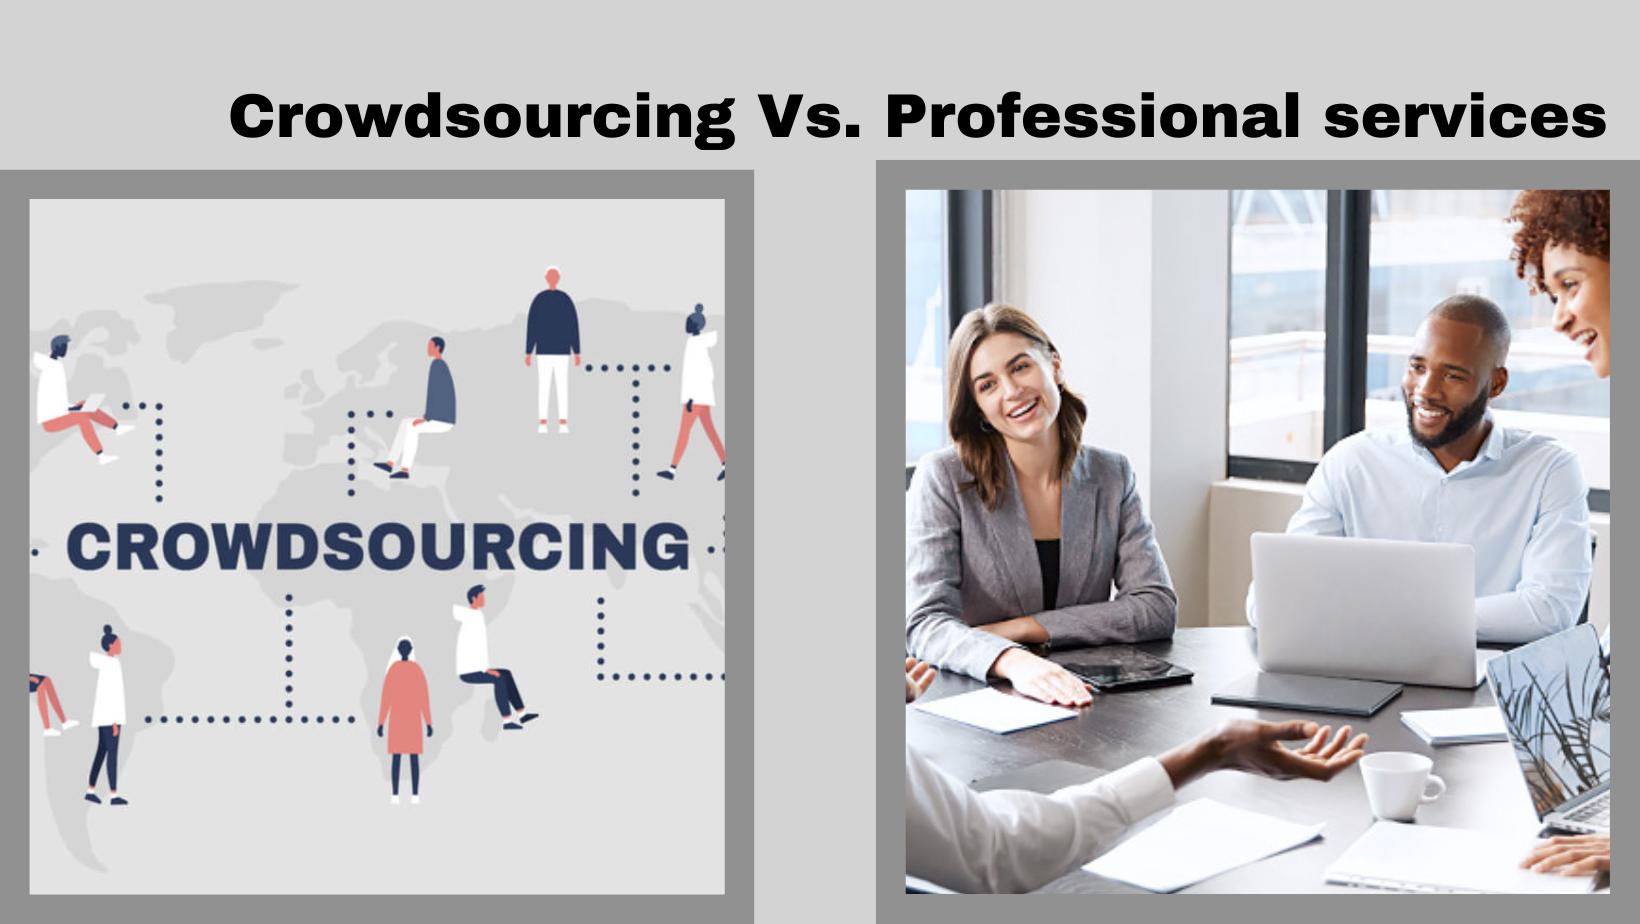 Crowdsourcing vs. Professional services